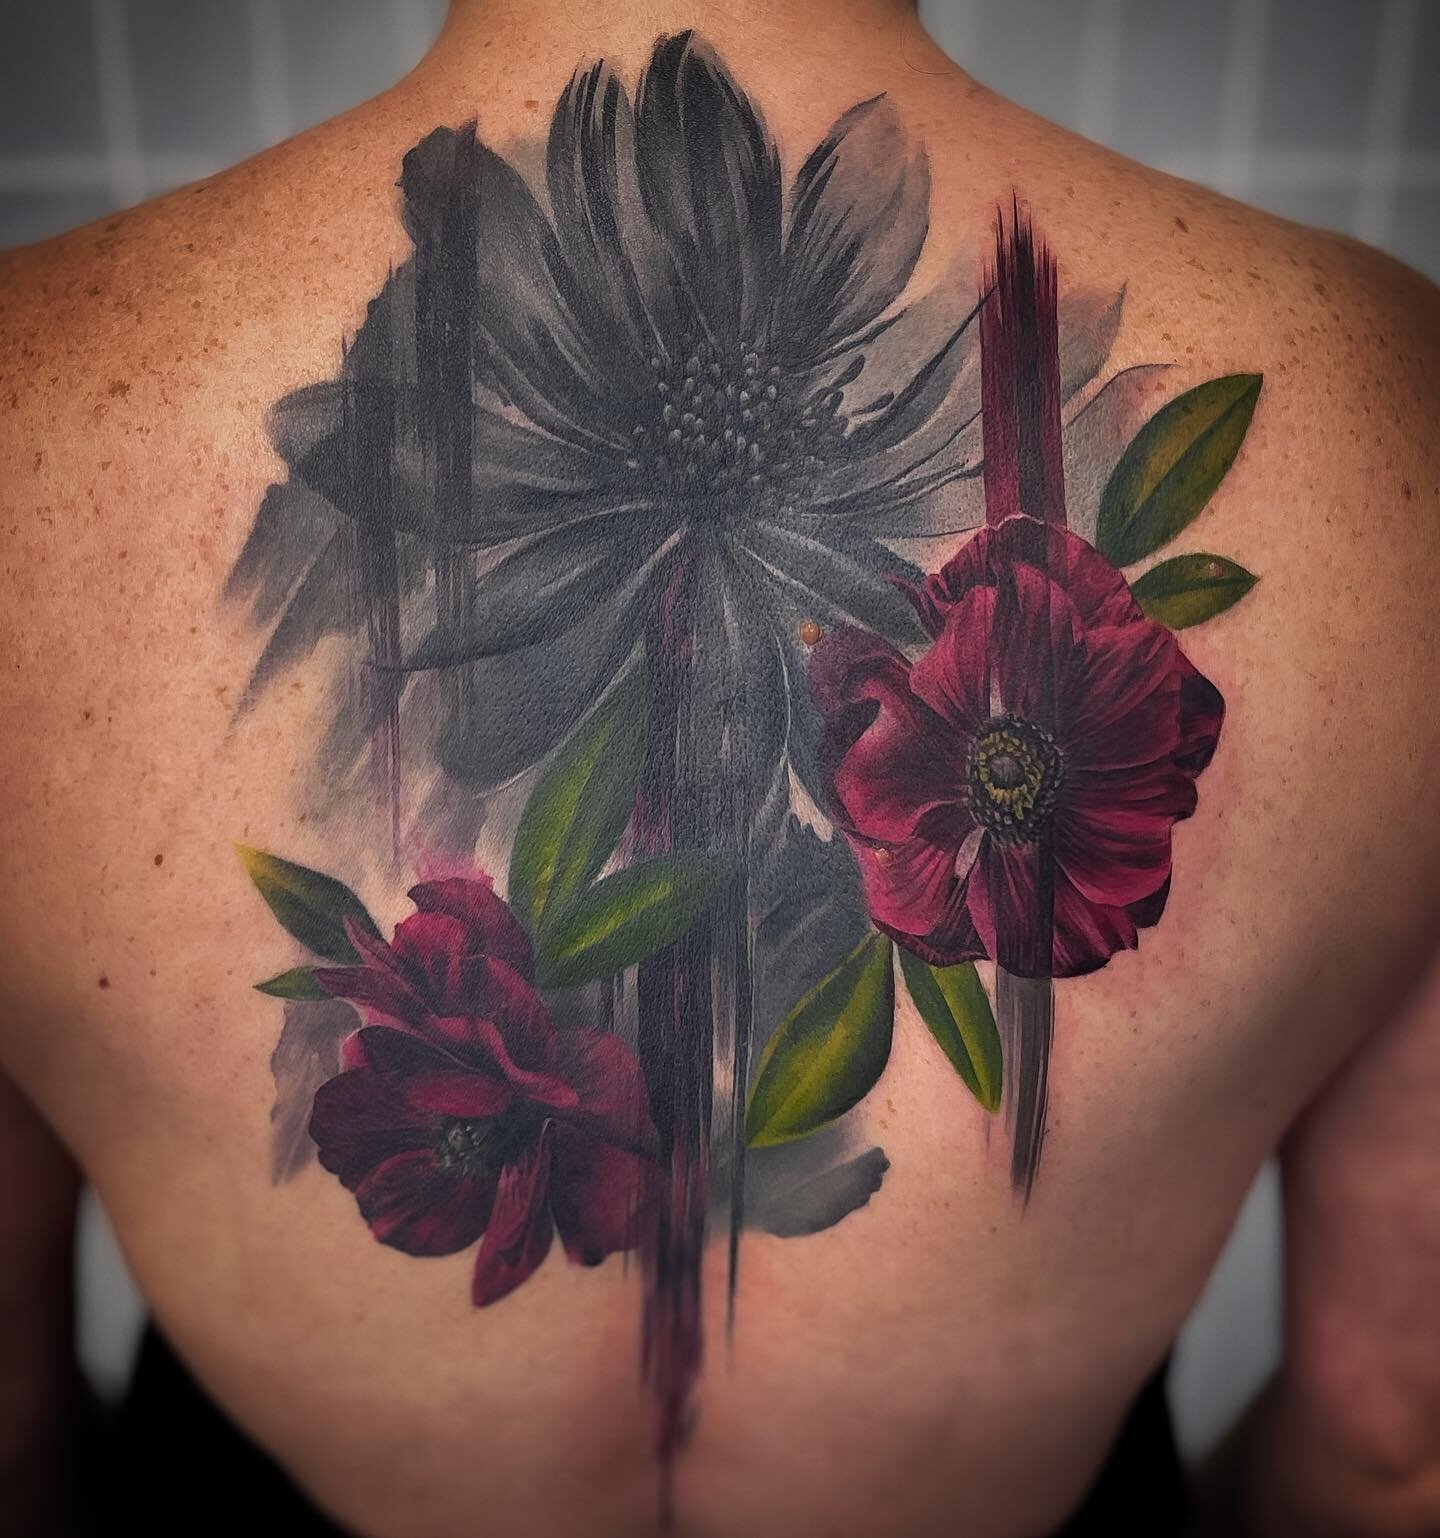 Here&rsquo;s the finished back piece after 3 full days!! Bottom and grey flower fully healed :) only some very minor touch ups needed! Hope you guys like it! 

Limited availability now for January and February! Message to book in ☺️

Proudly sponsore